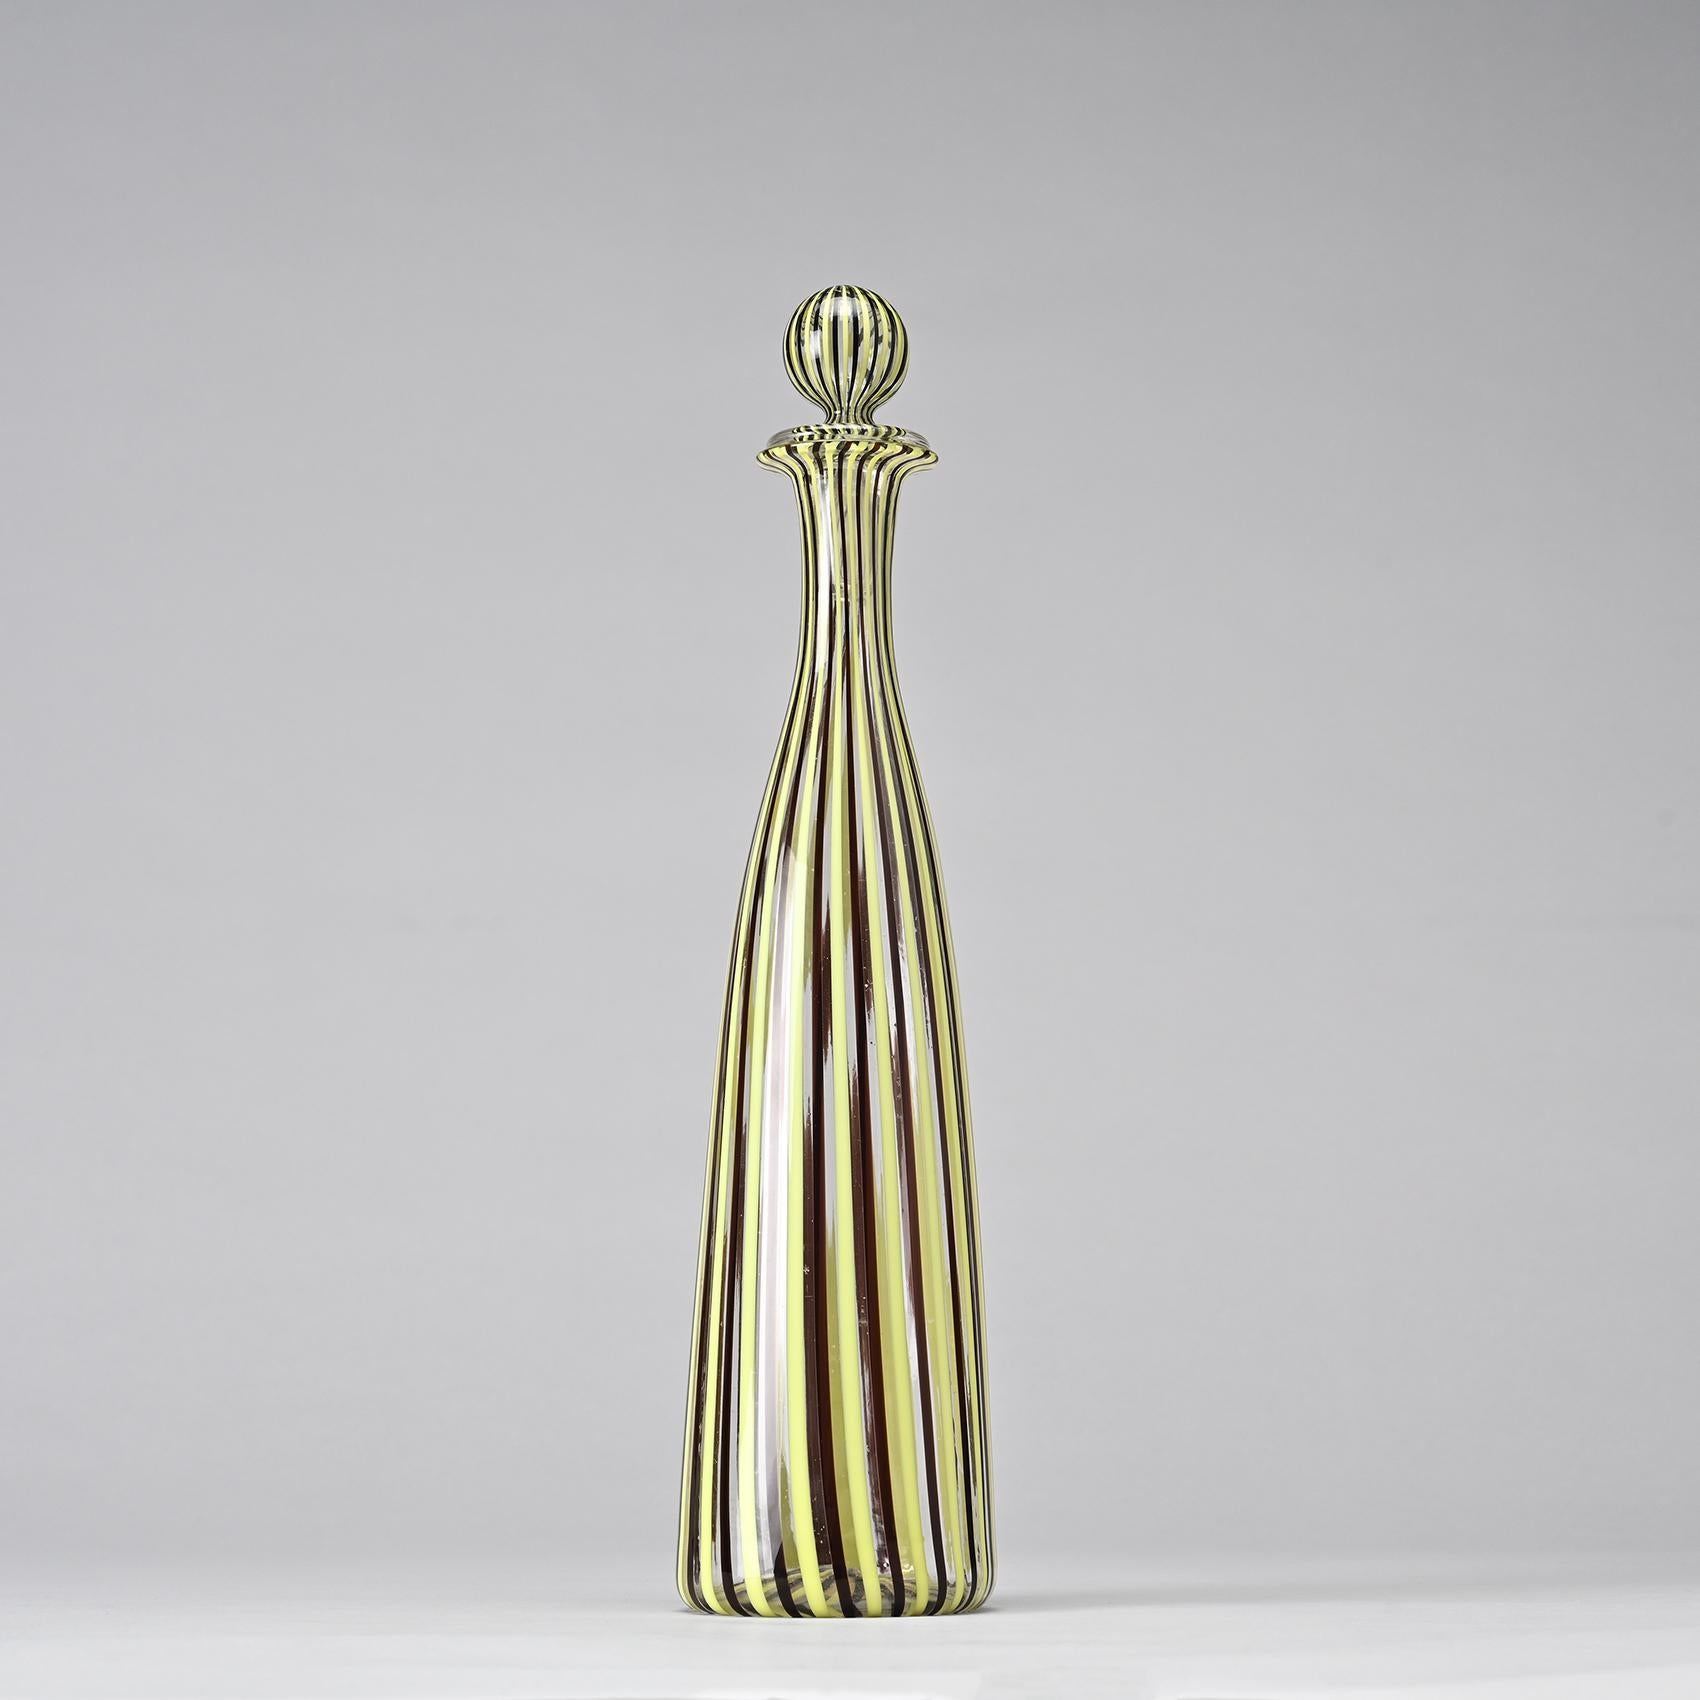 Clear blown glass bottle with yellow and black filigree decoration by Fulvio Bianconi, sealed with a spherical stopper.

Venini label on the back.

Manufactuer: Venini, circa 1950.

Bibliography: Similar model in Murano Milano Venezia glass, Die